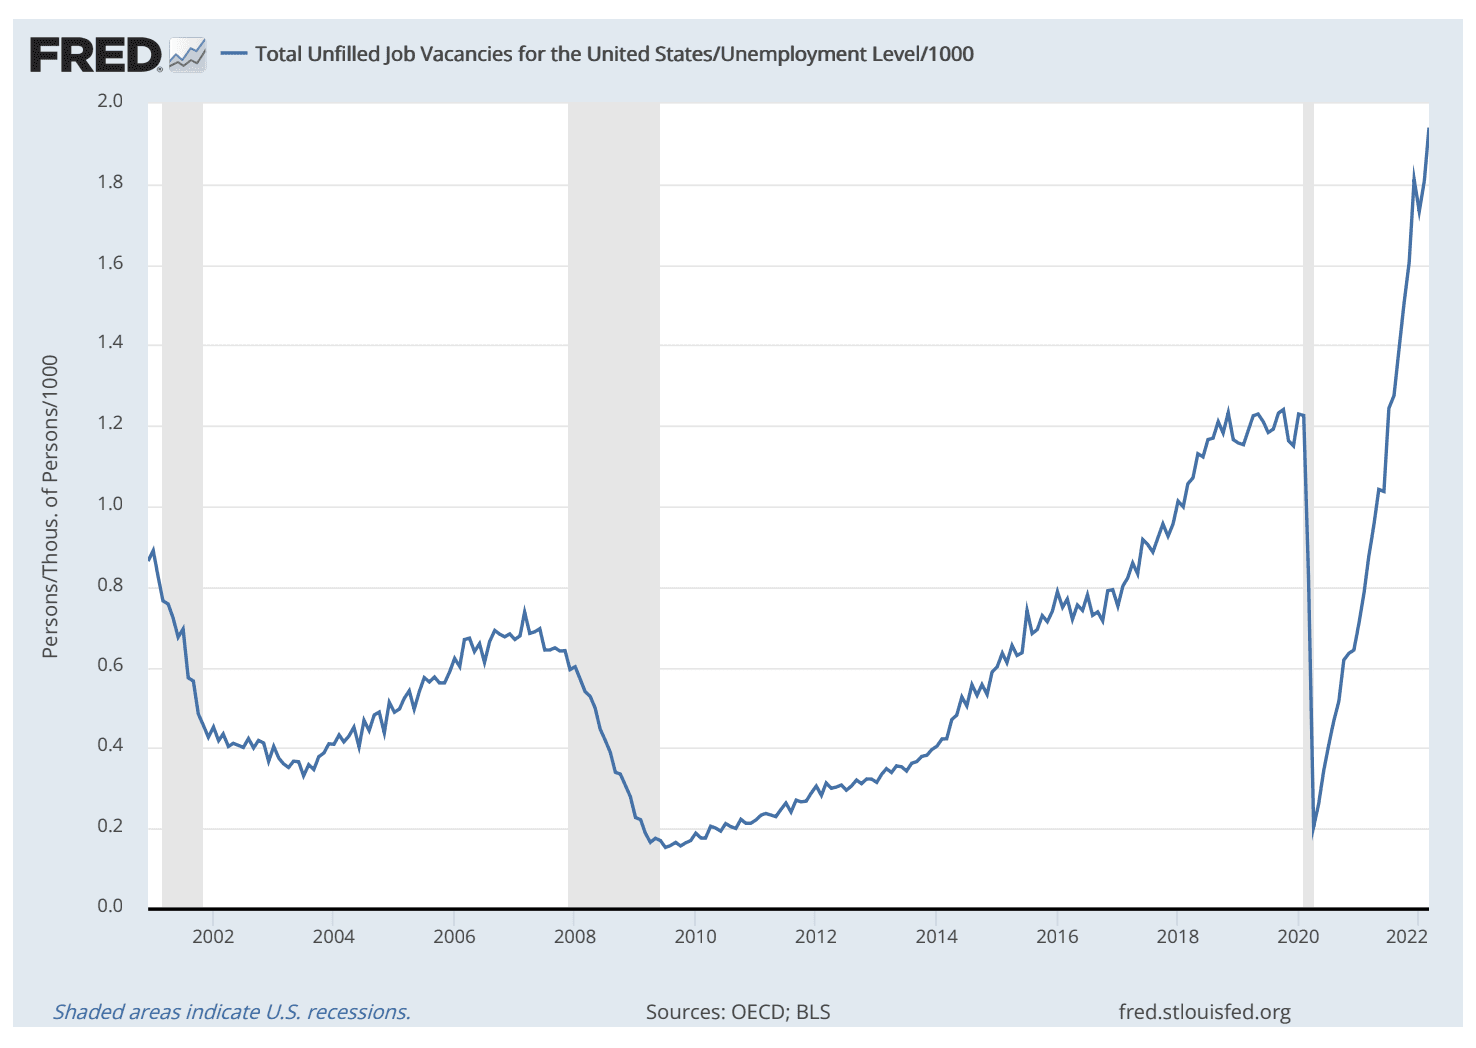 FRED economic data chart showing total unfilled job vacancies for the United States.